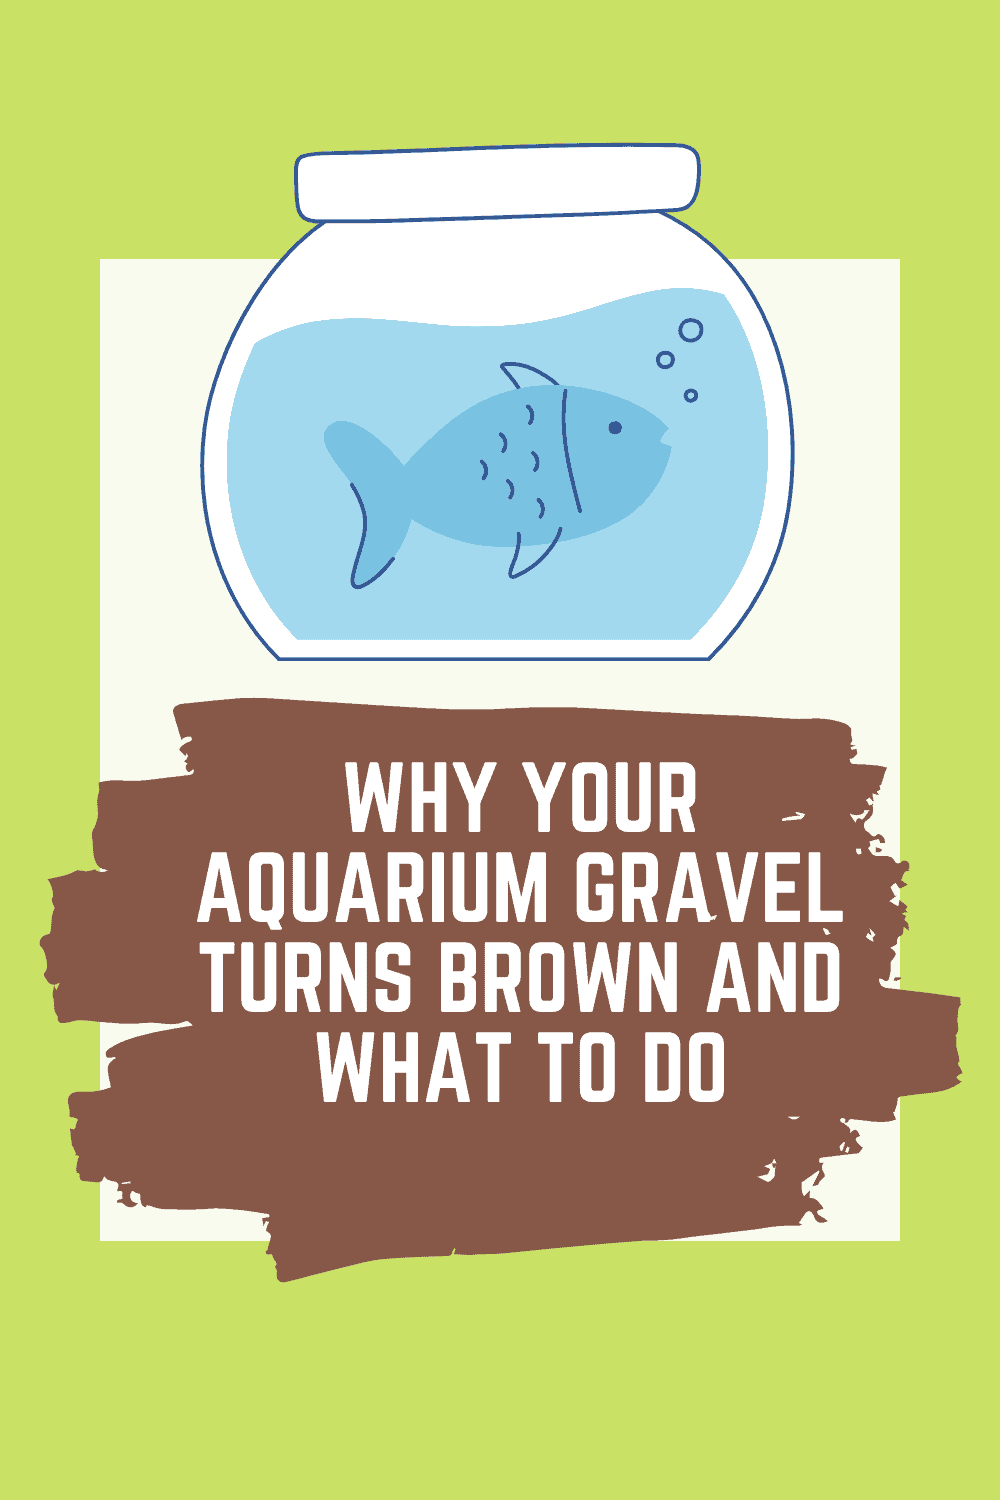 Why your aquarium gravel turns brown and what to do